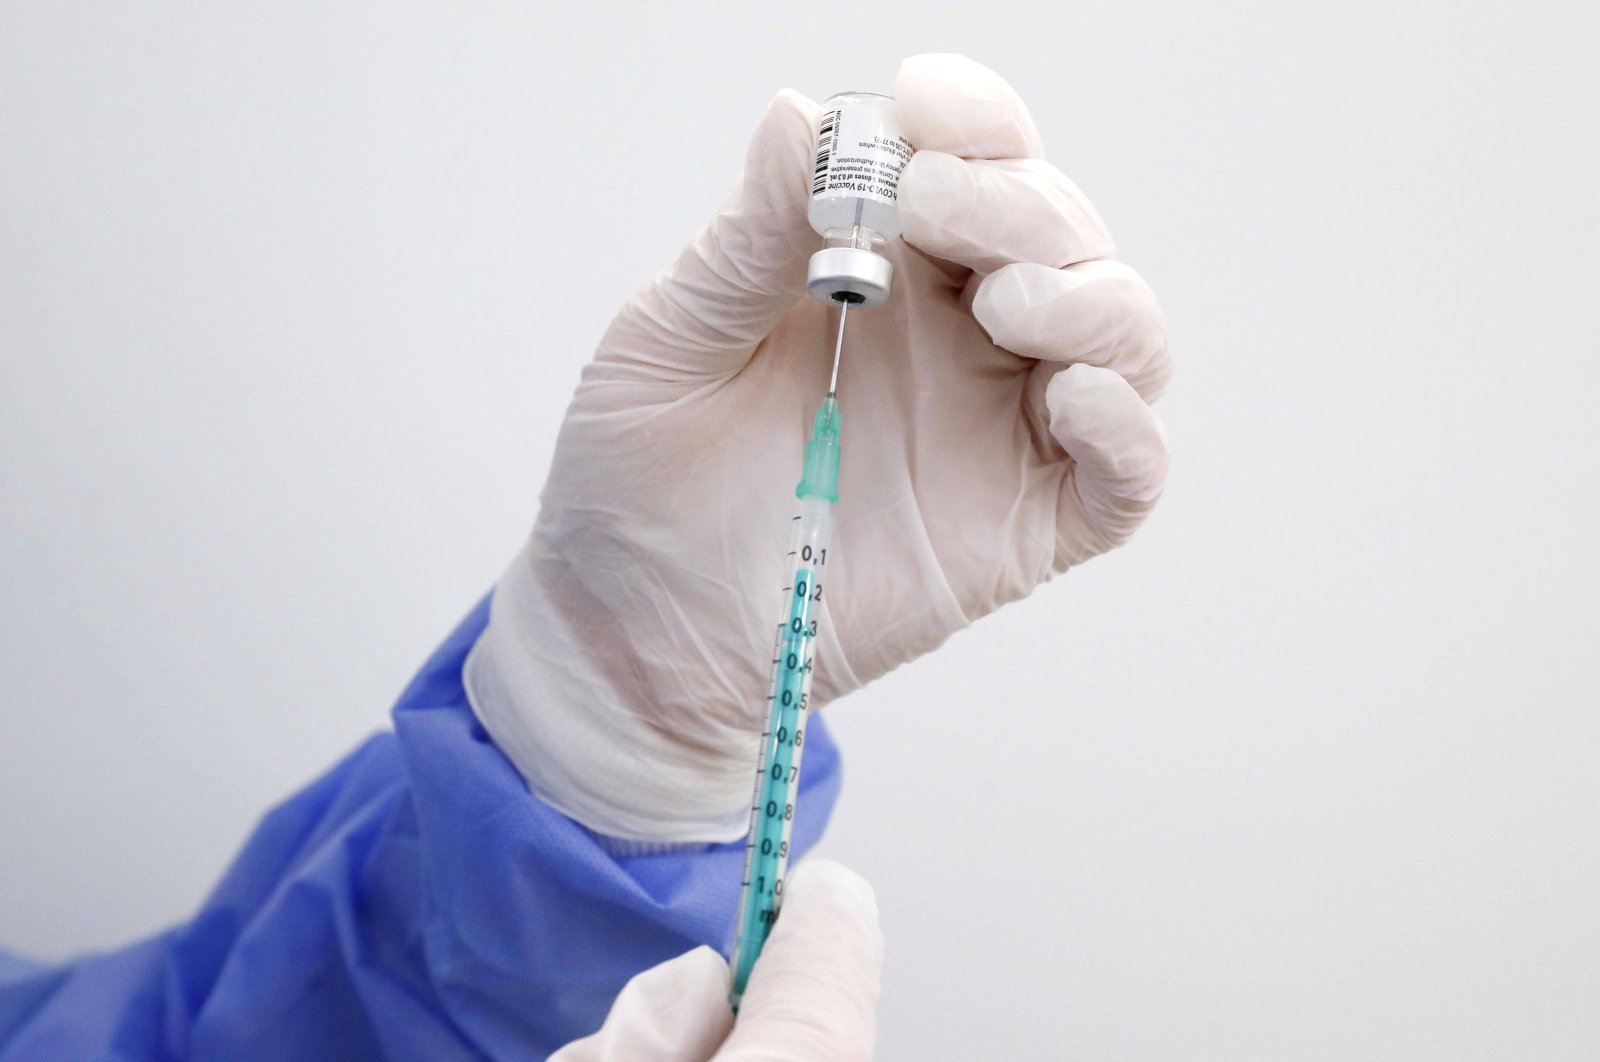 A syringe is filled with the Biontech Pfizer vaccine against COVID-19, in the vaccination center at Terminal 5 of BER airport, Feb 15, 2021, Schonefeld Brandenburg, Germany. (Reuters Photo)